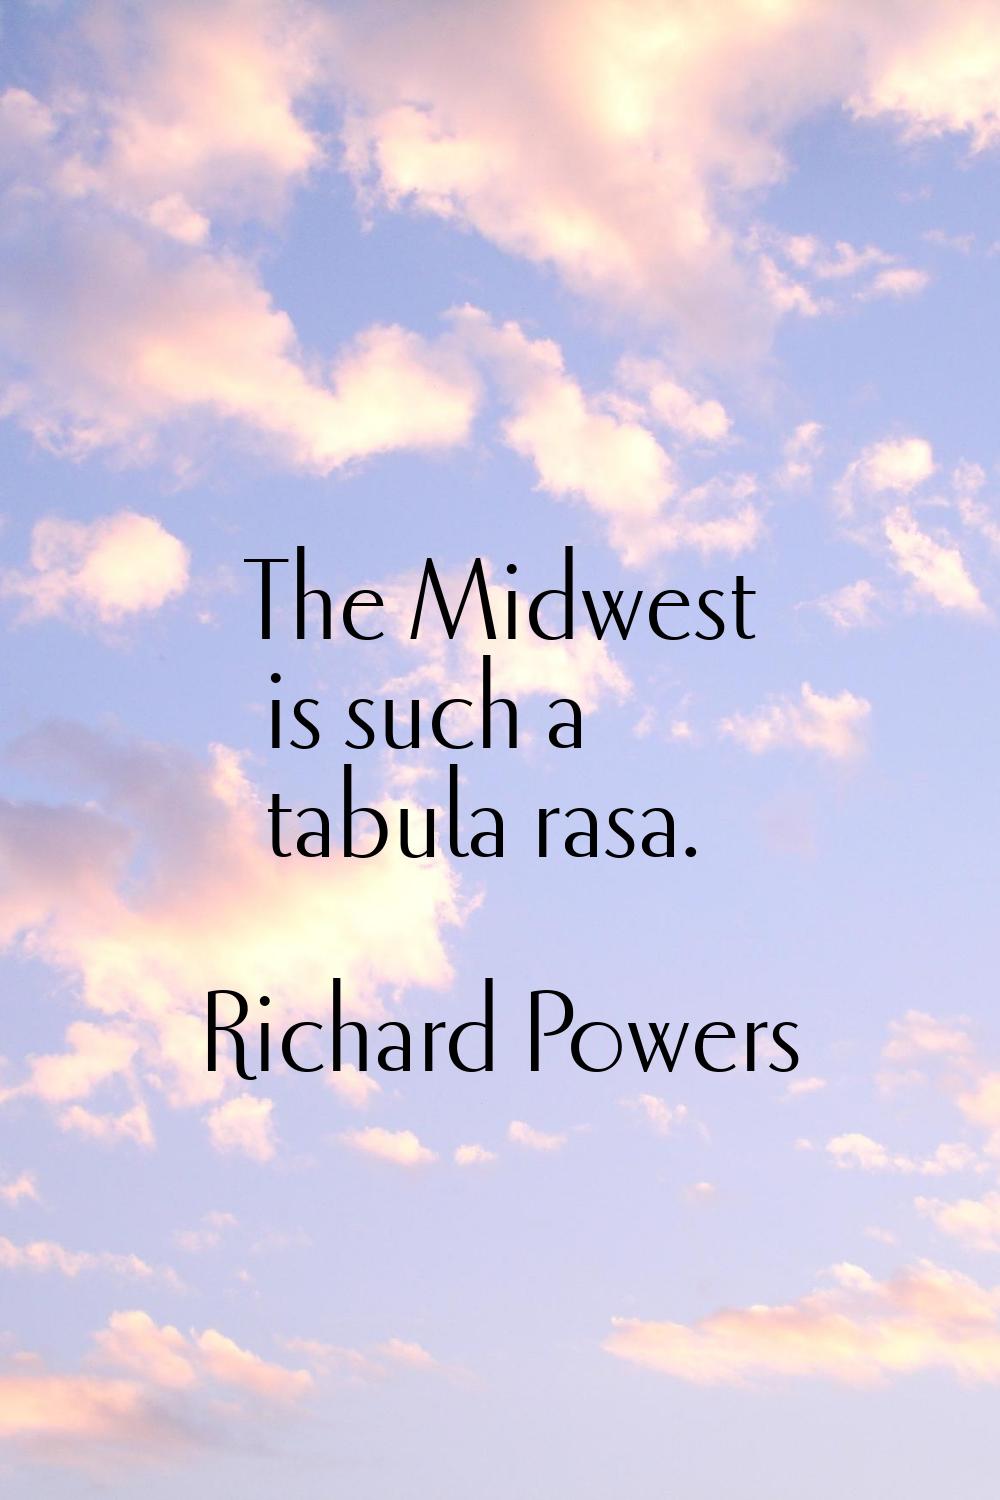 The Midwest is such a tabula rasa.